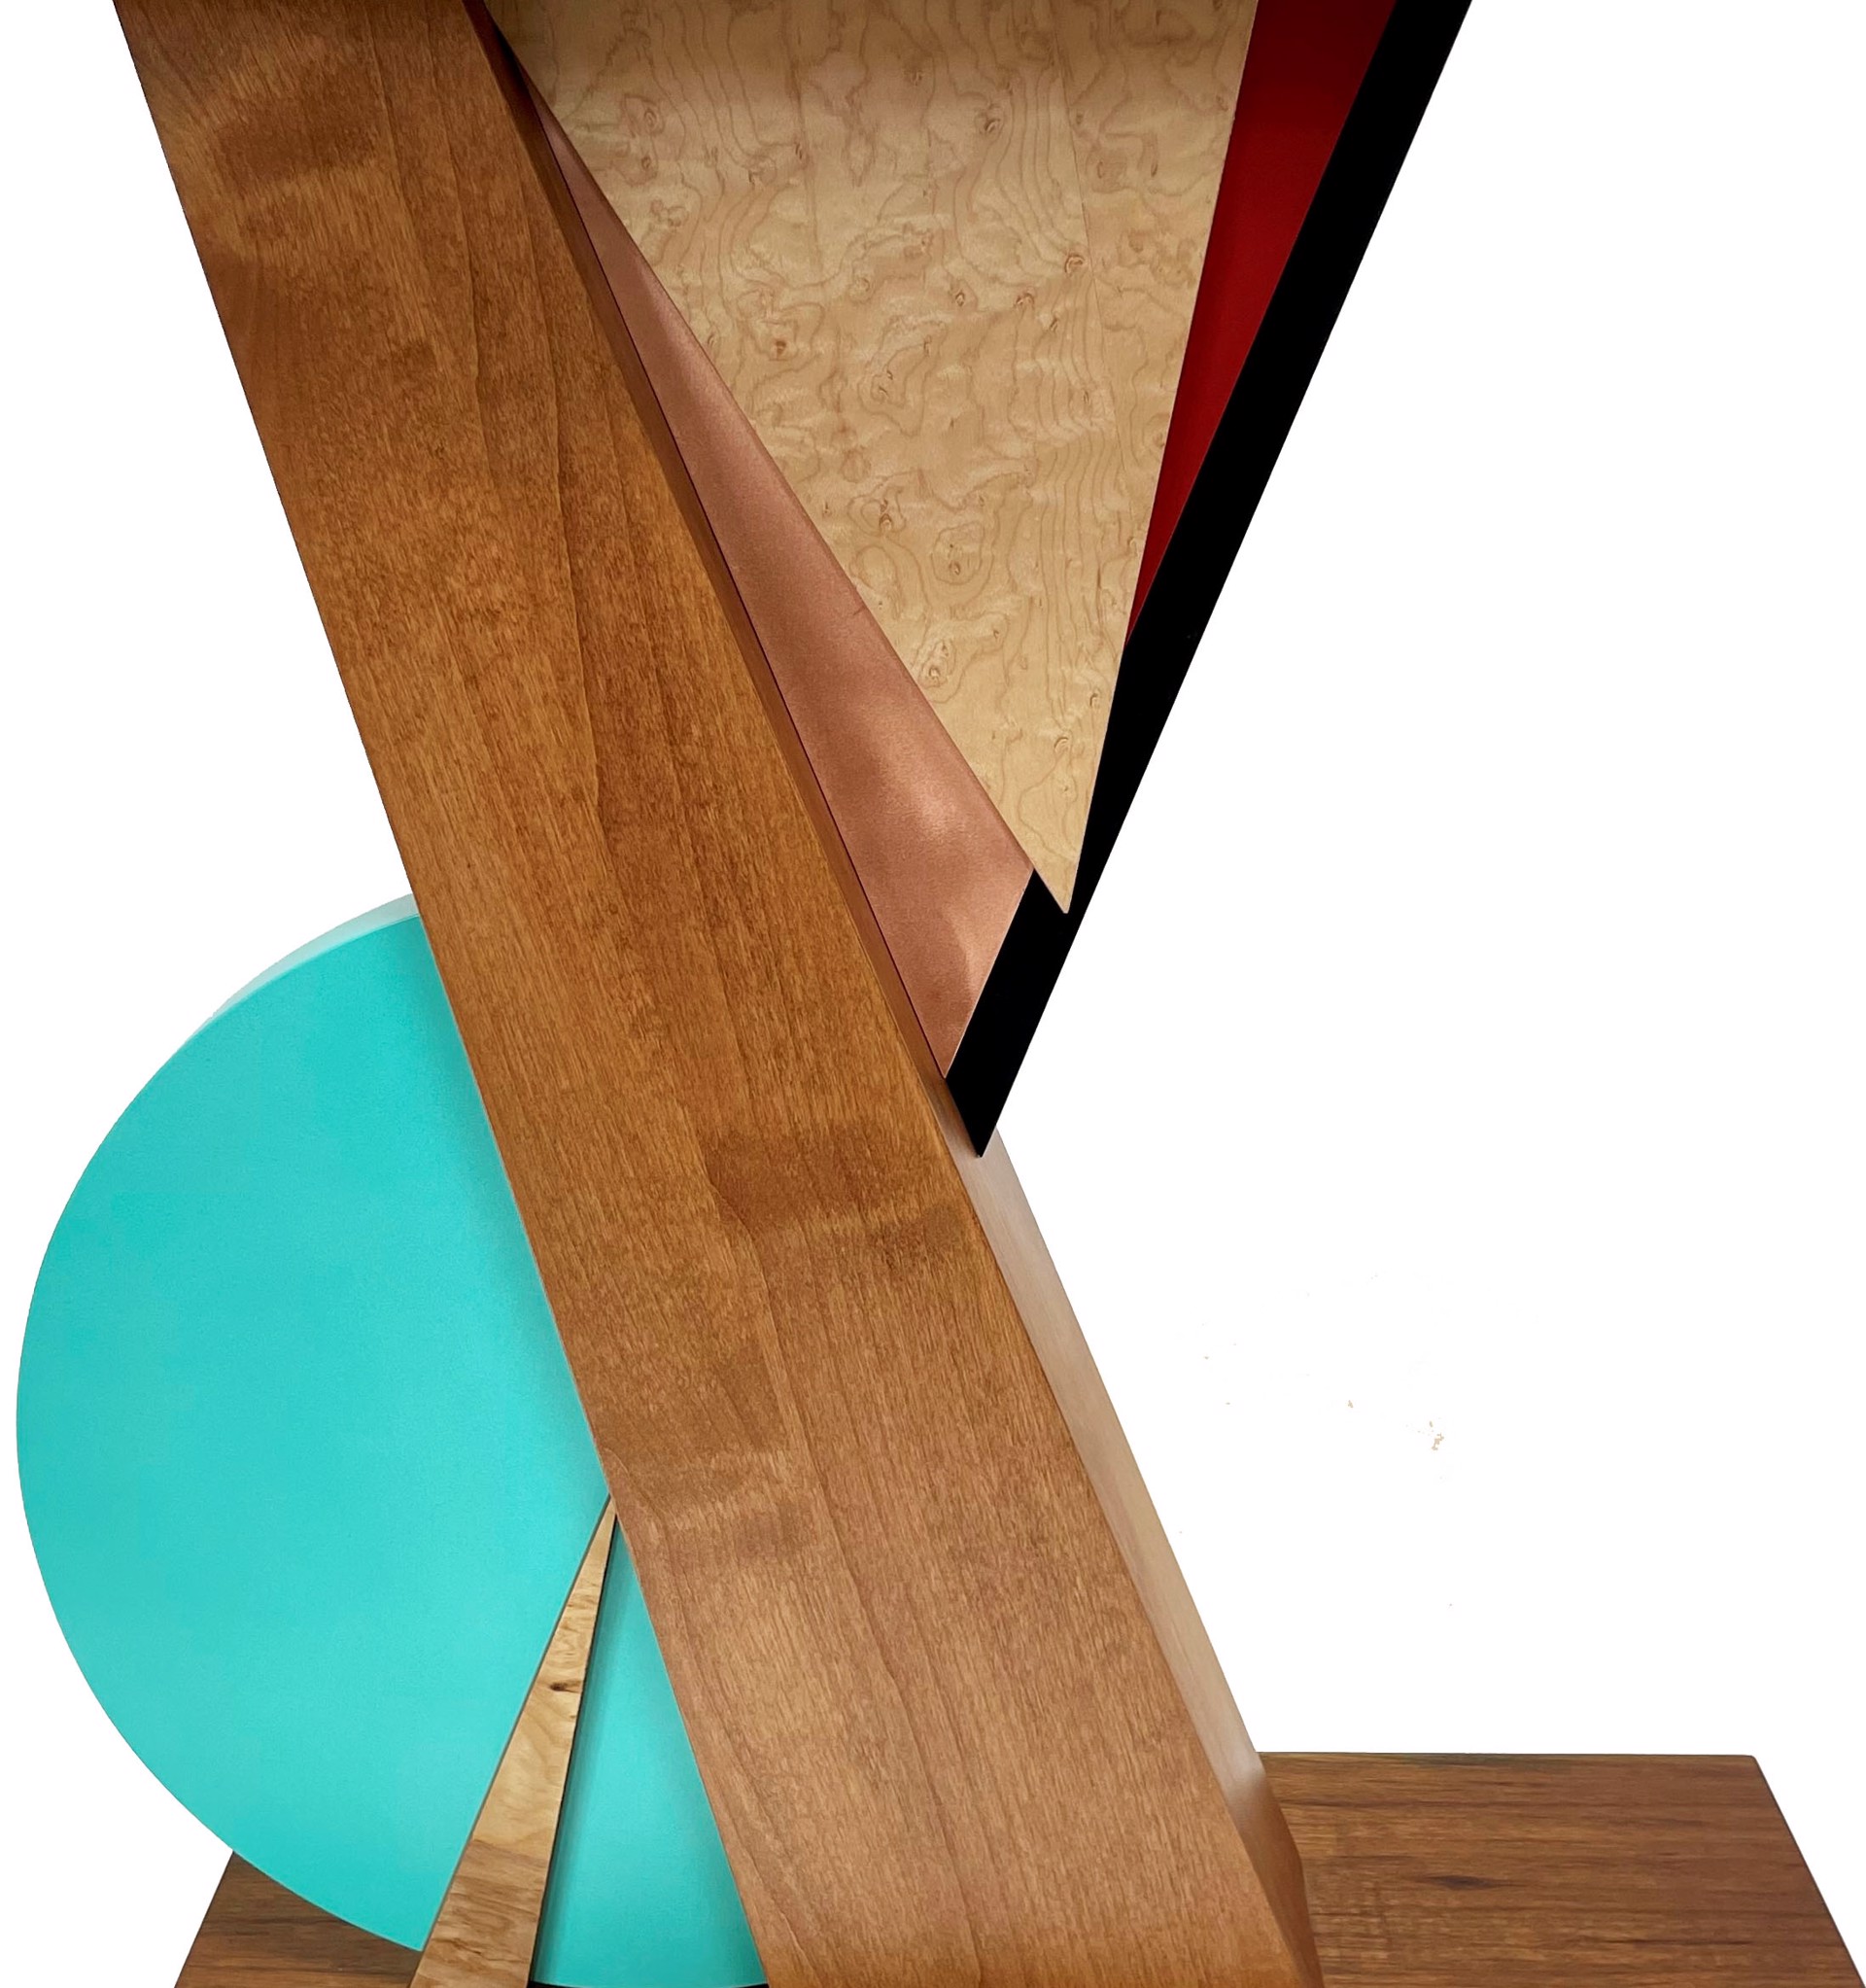 Shedue & Turquoise Table ~ Top & Base Shedue, Alder Veneer, Birds Eye Maple, Painted Finish & Copper by Joseph Nikrasch